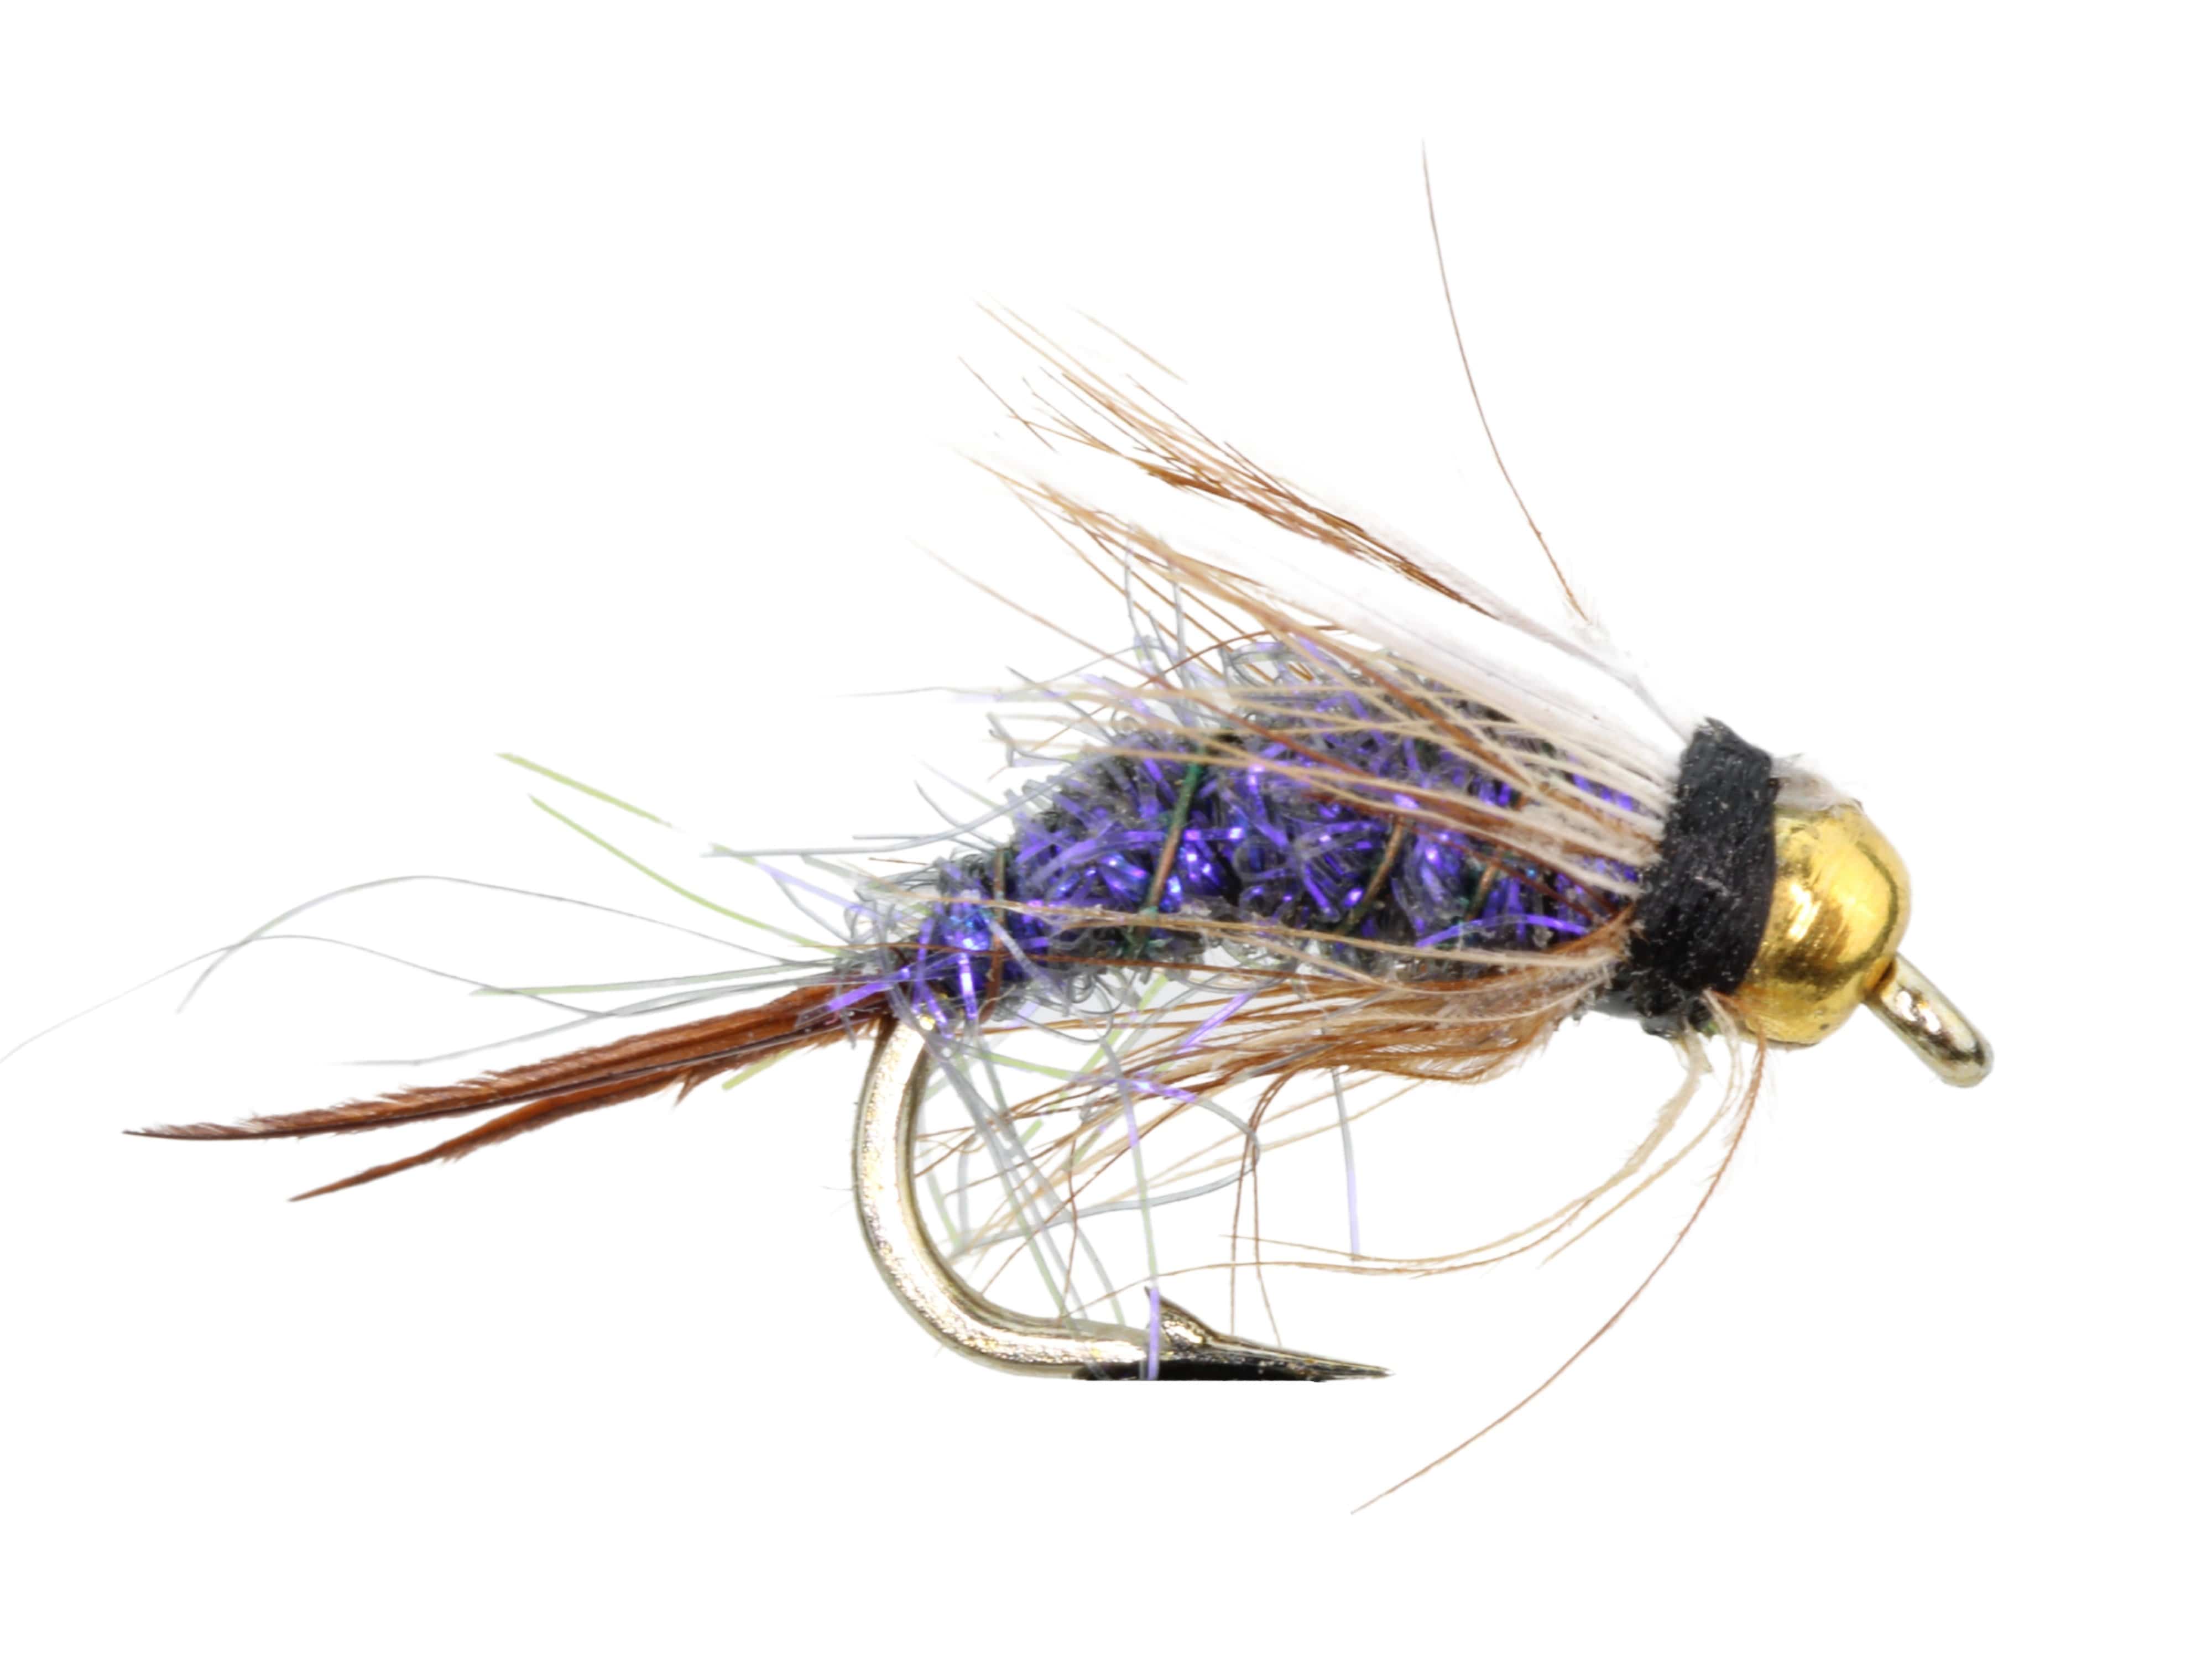 Wild Water Fly Fishing Fly Tying Material Kit, Bead Head Purple Prince Nymph